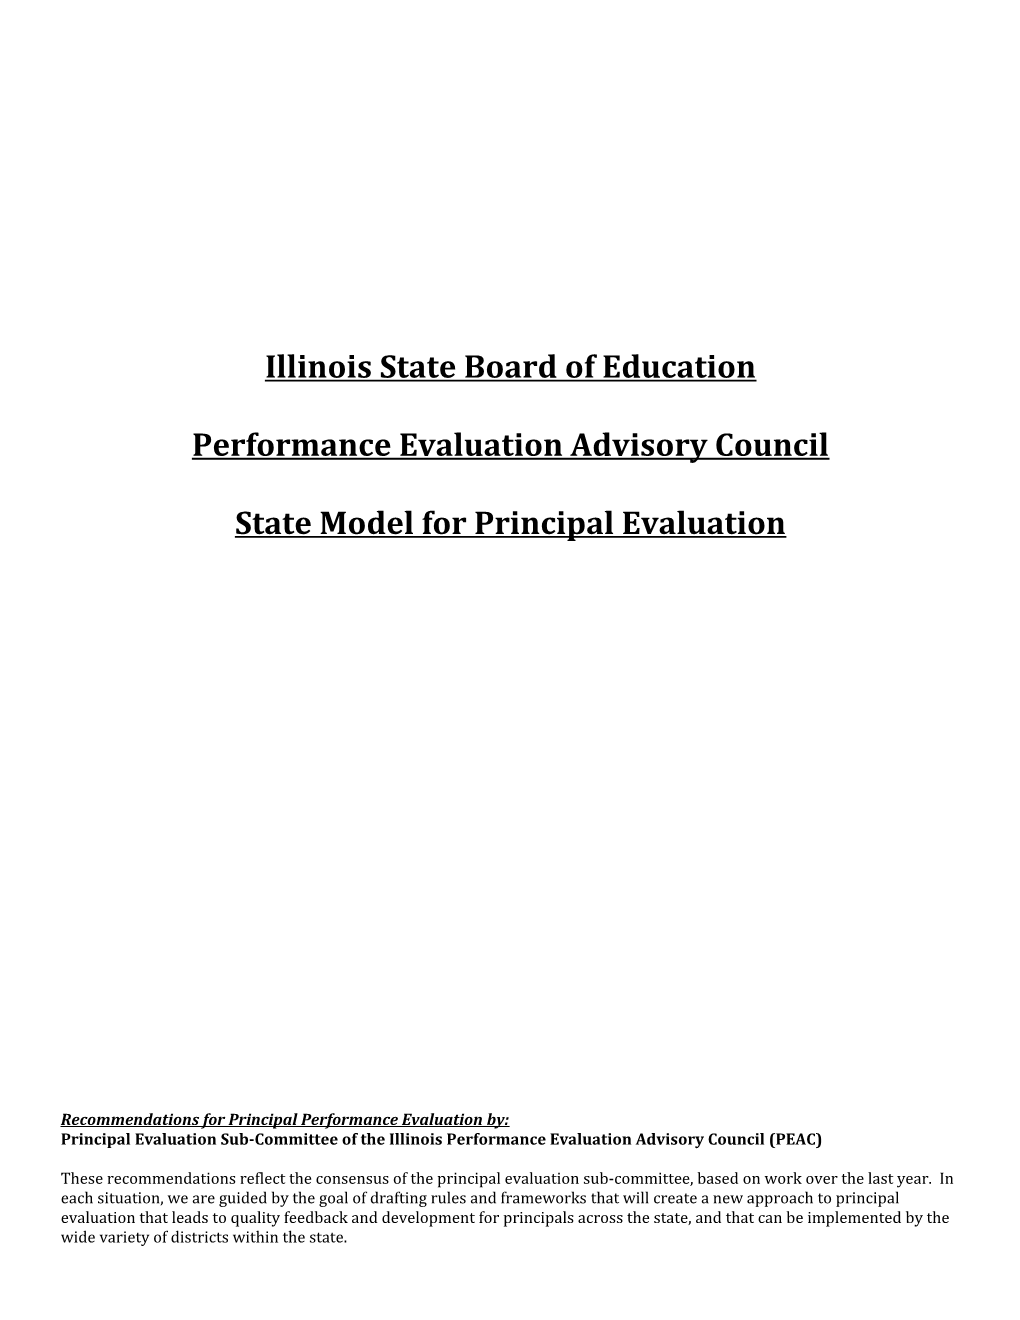 PEAC State Model for Principal Evaluation